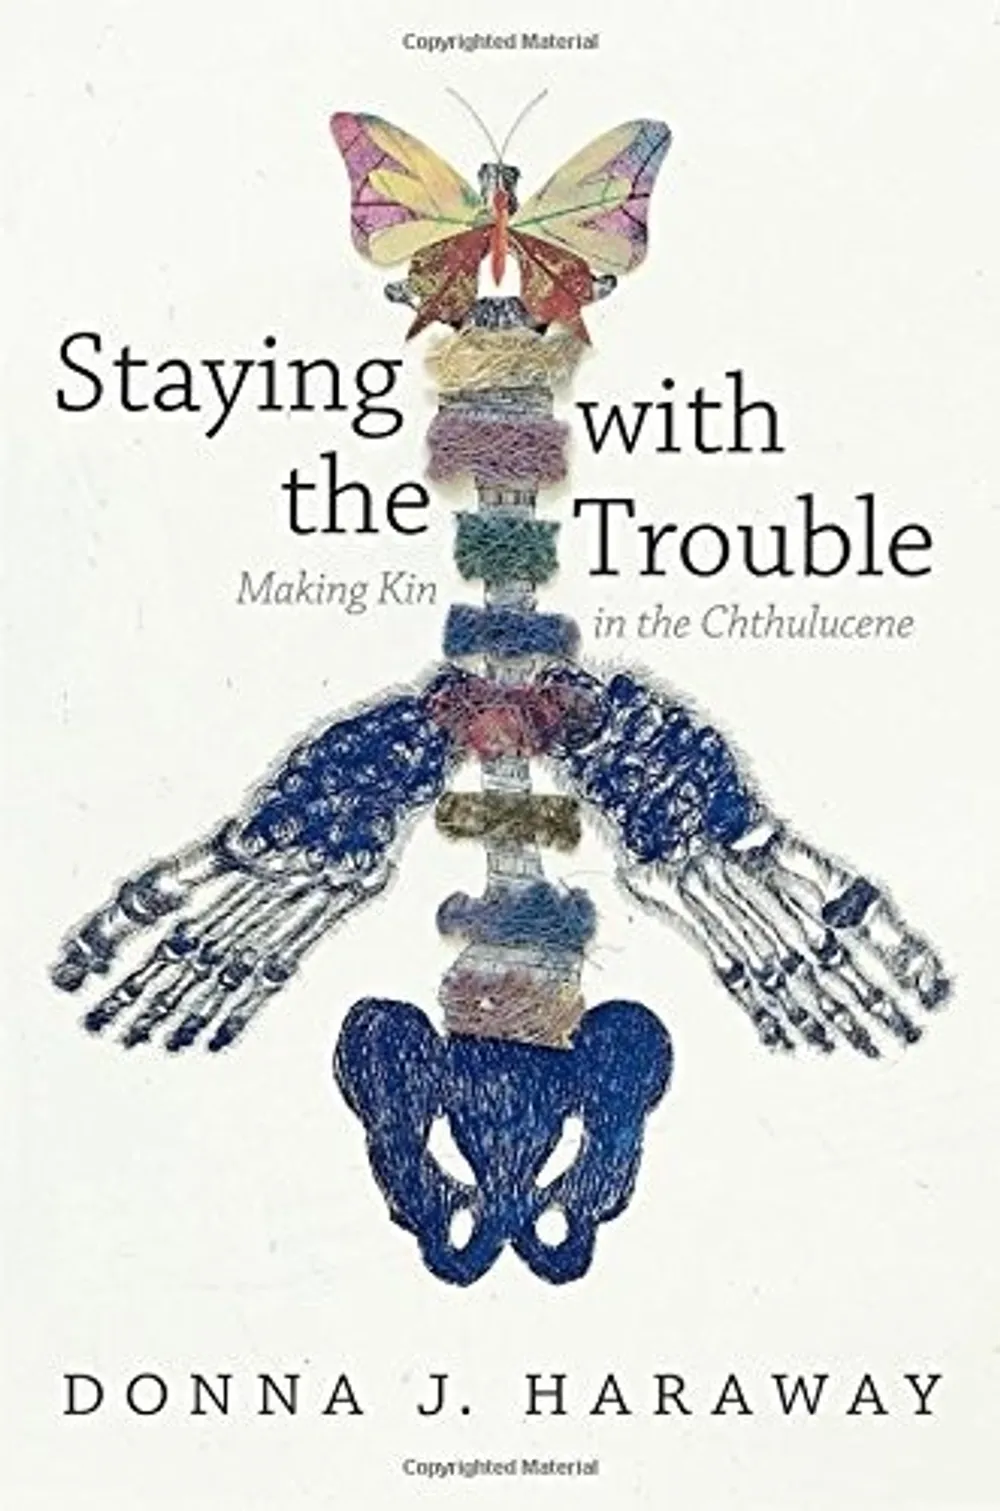 Staying with the Trouble, by Donna J. Haraway